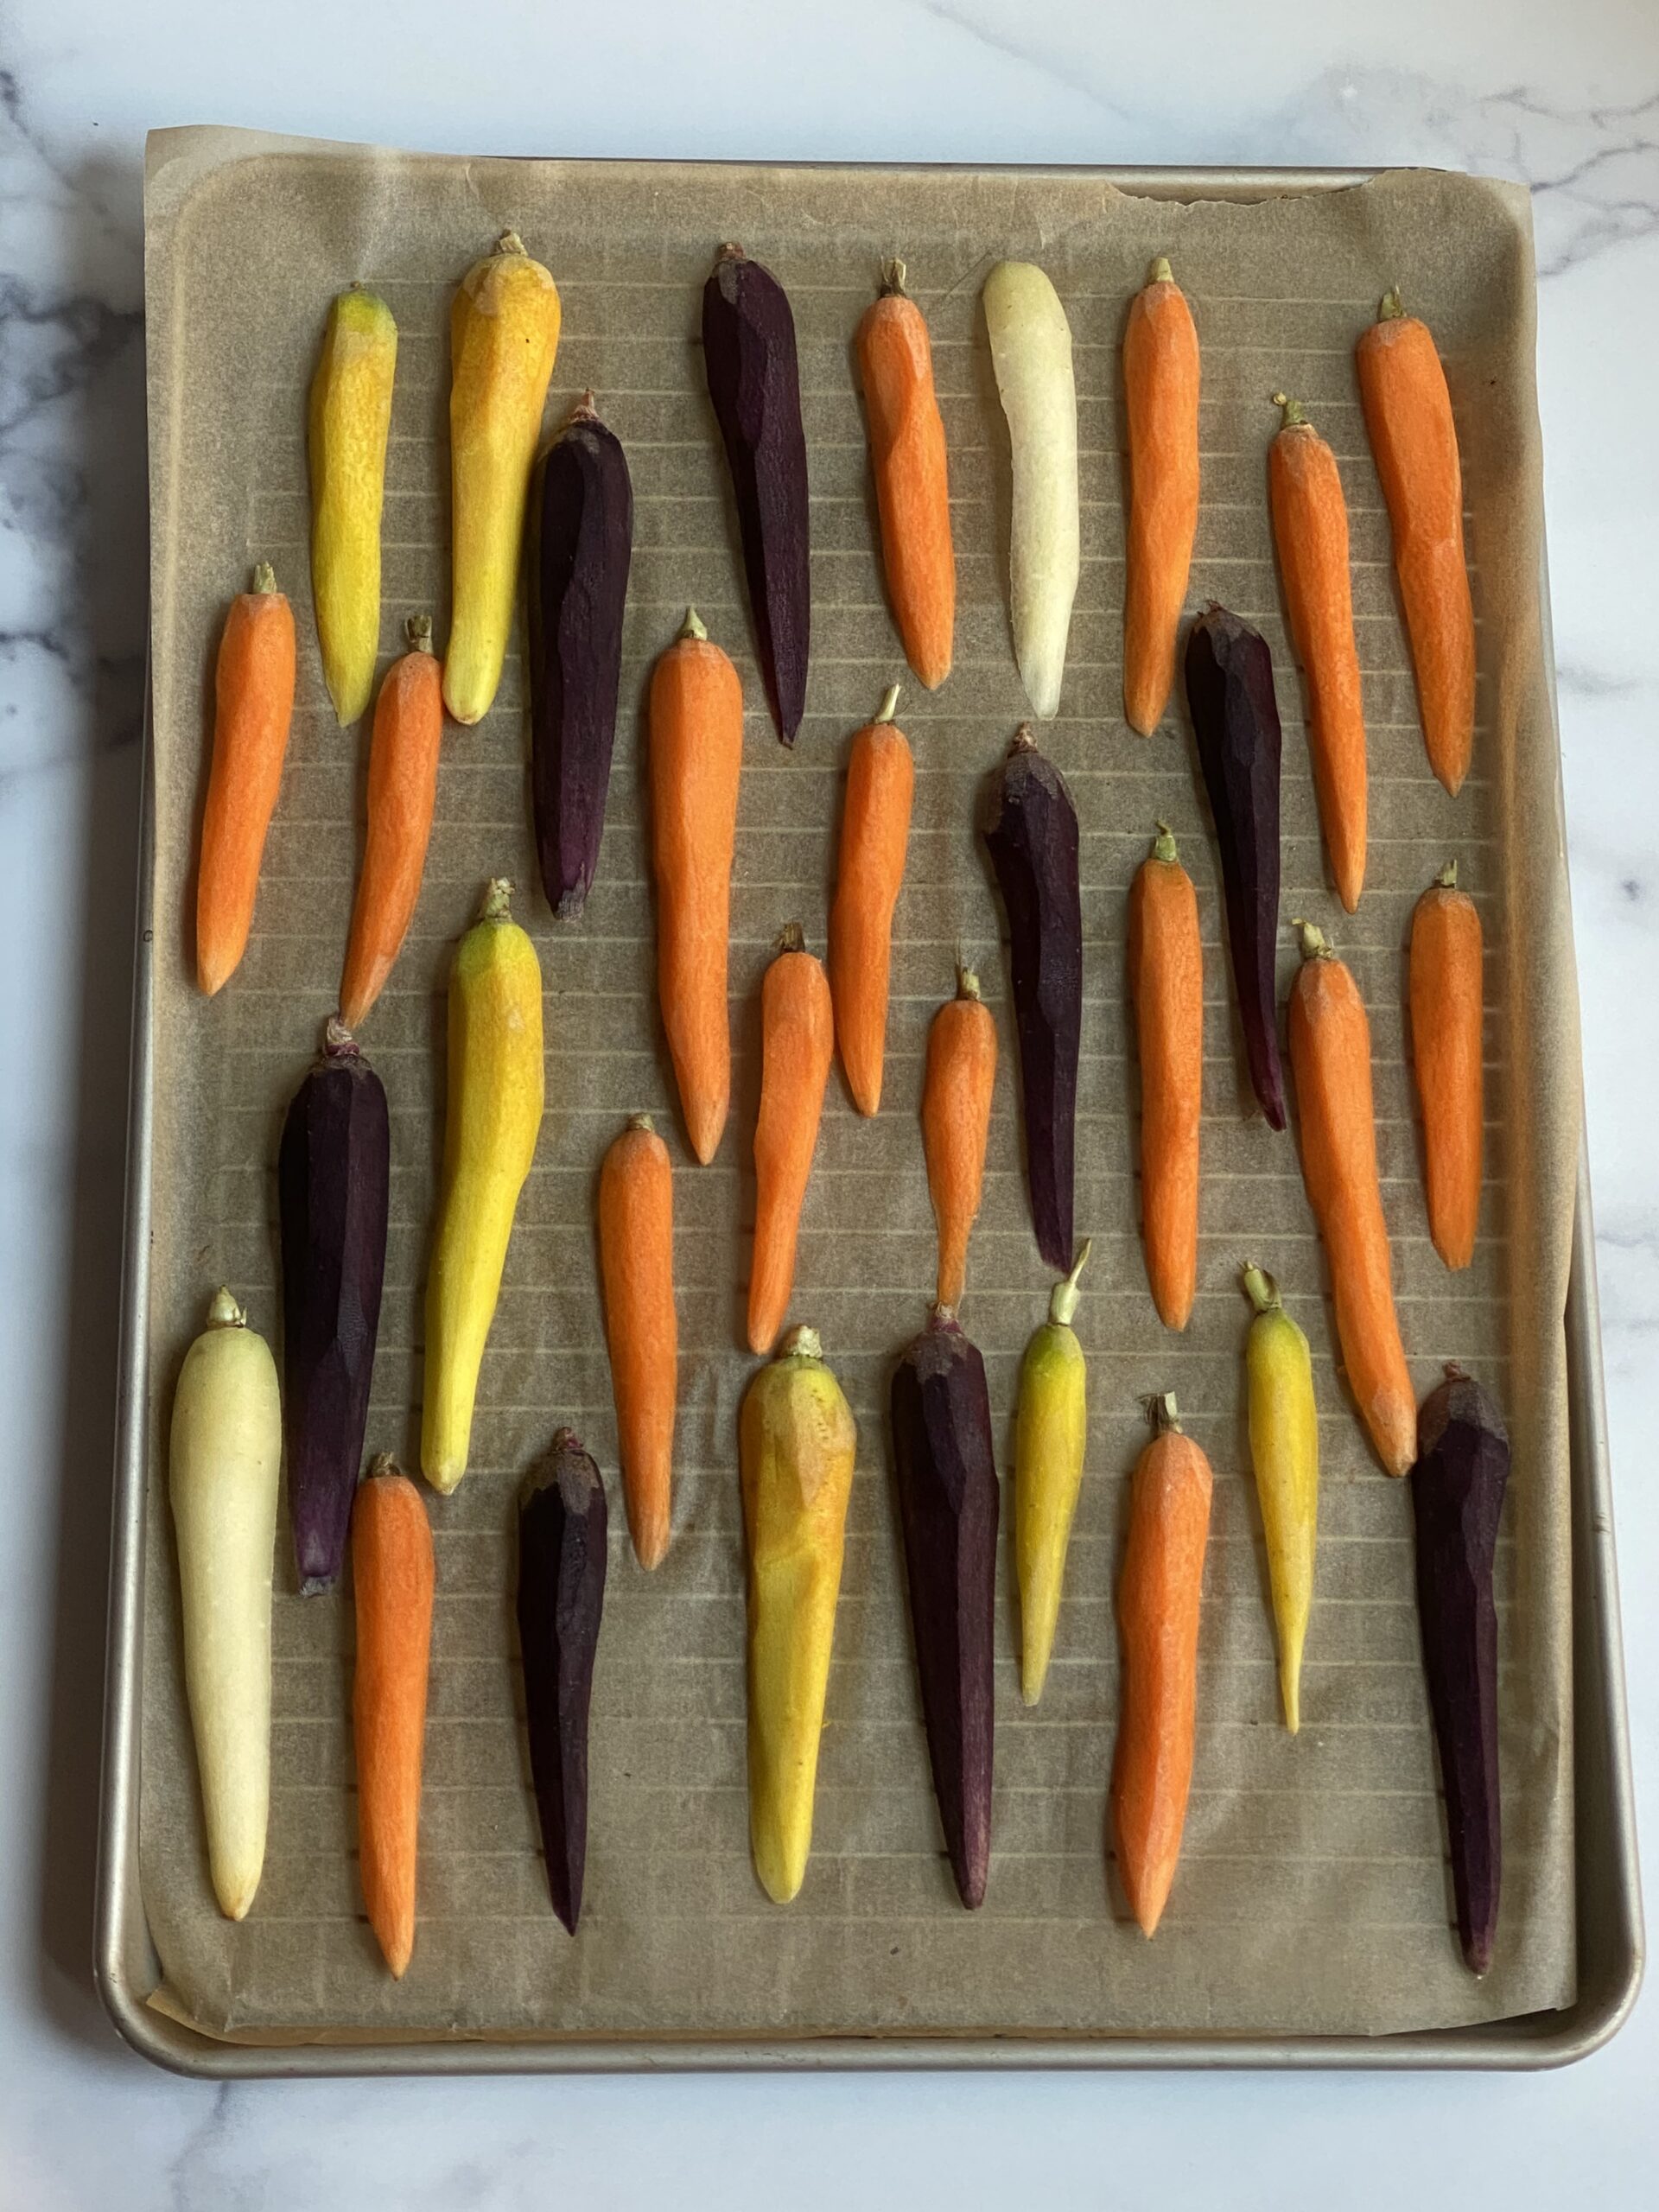 Carrots placed on a sheet in a single layer